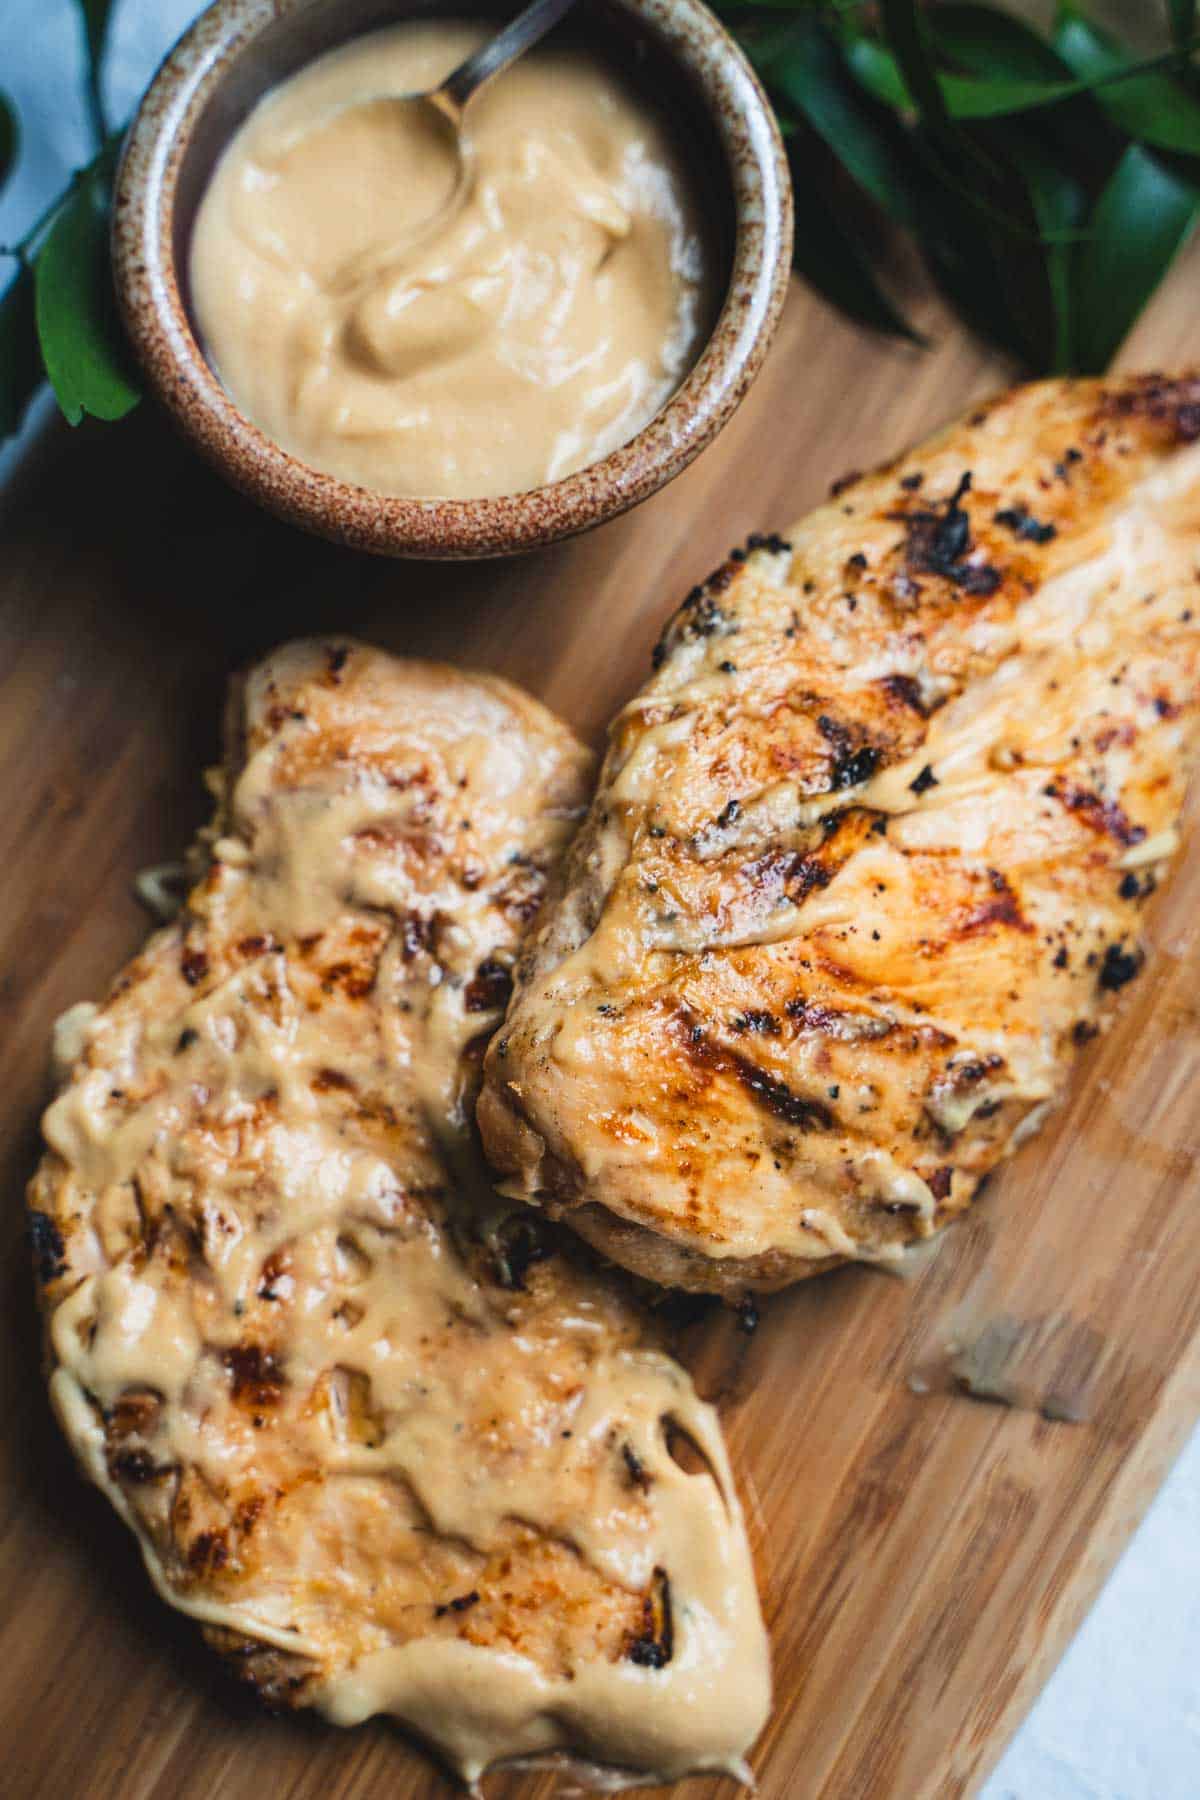 Mayo marinated chicken grilled chicken breasts on wooden cutting board with cup of mayo marinade